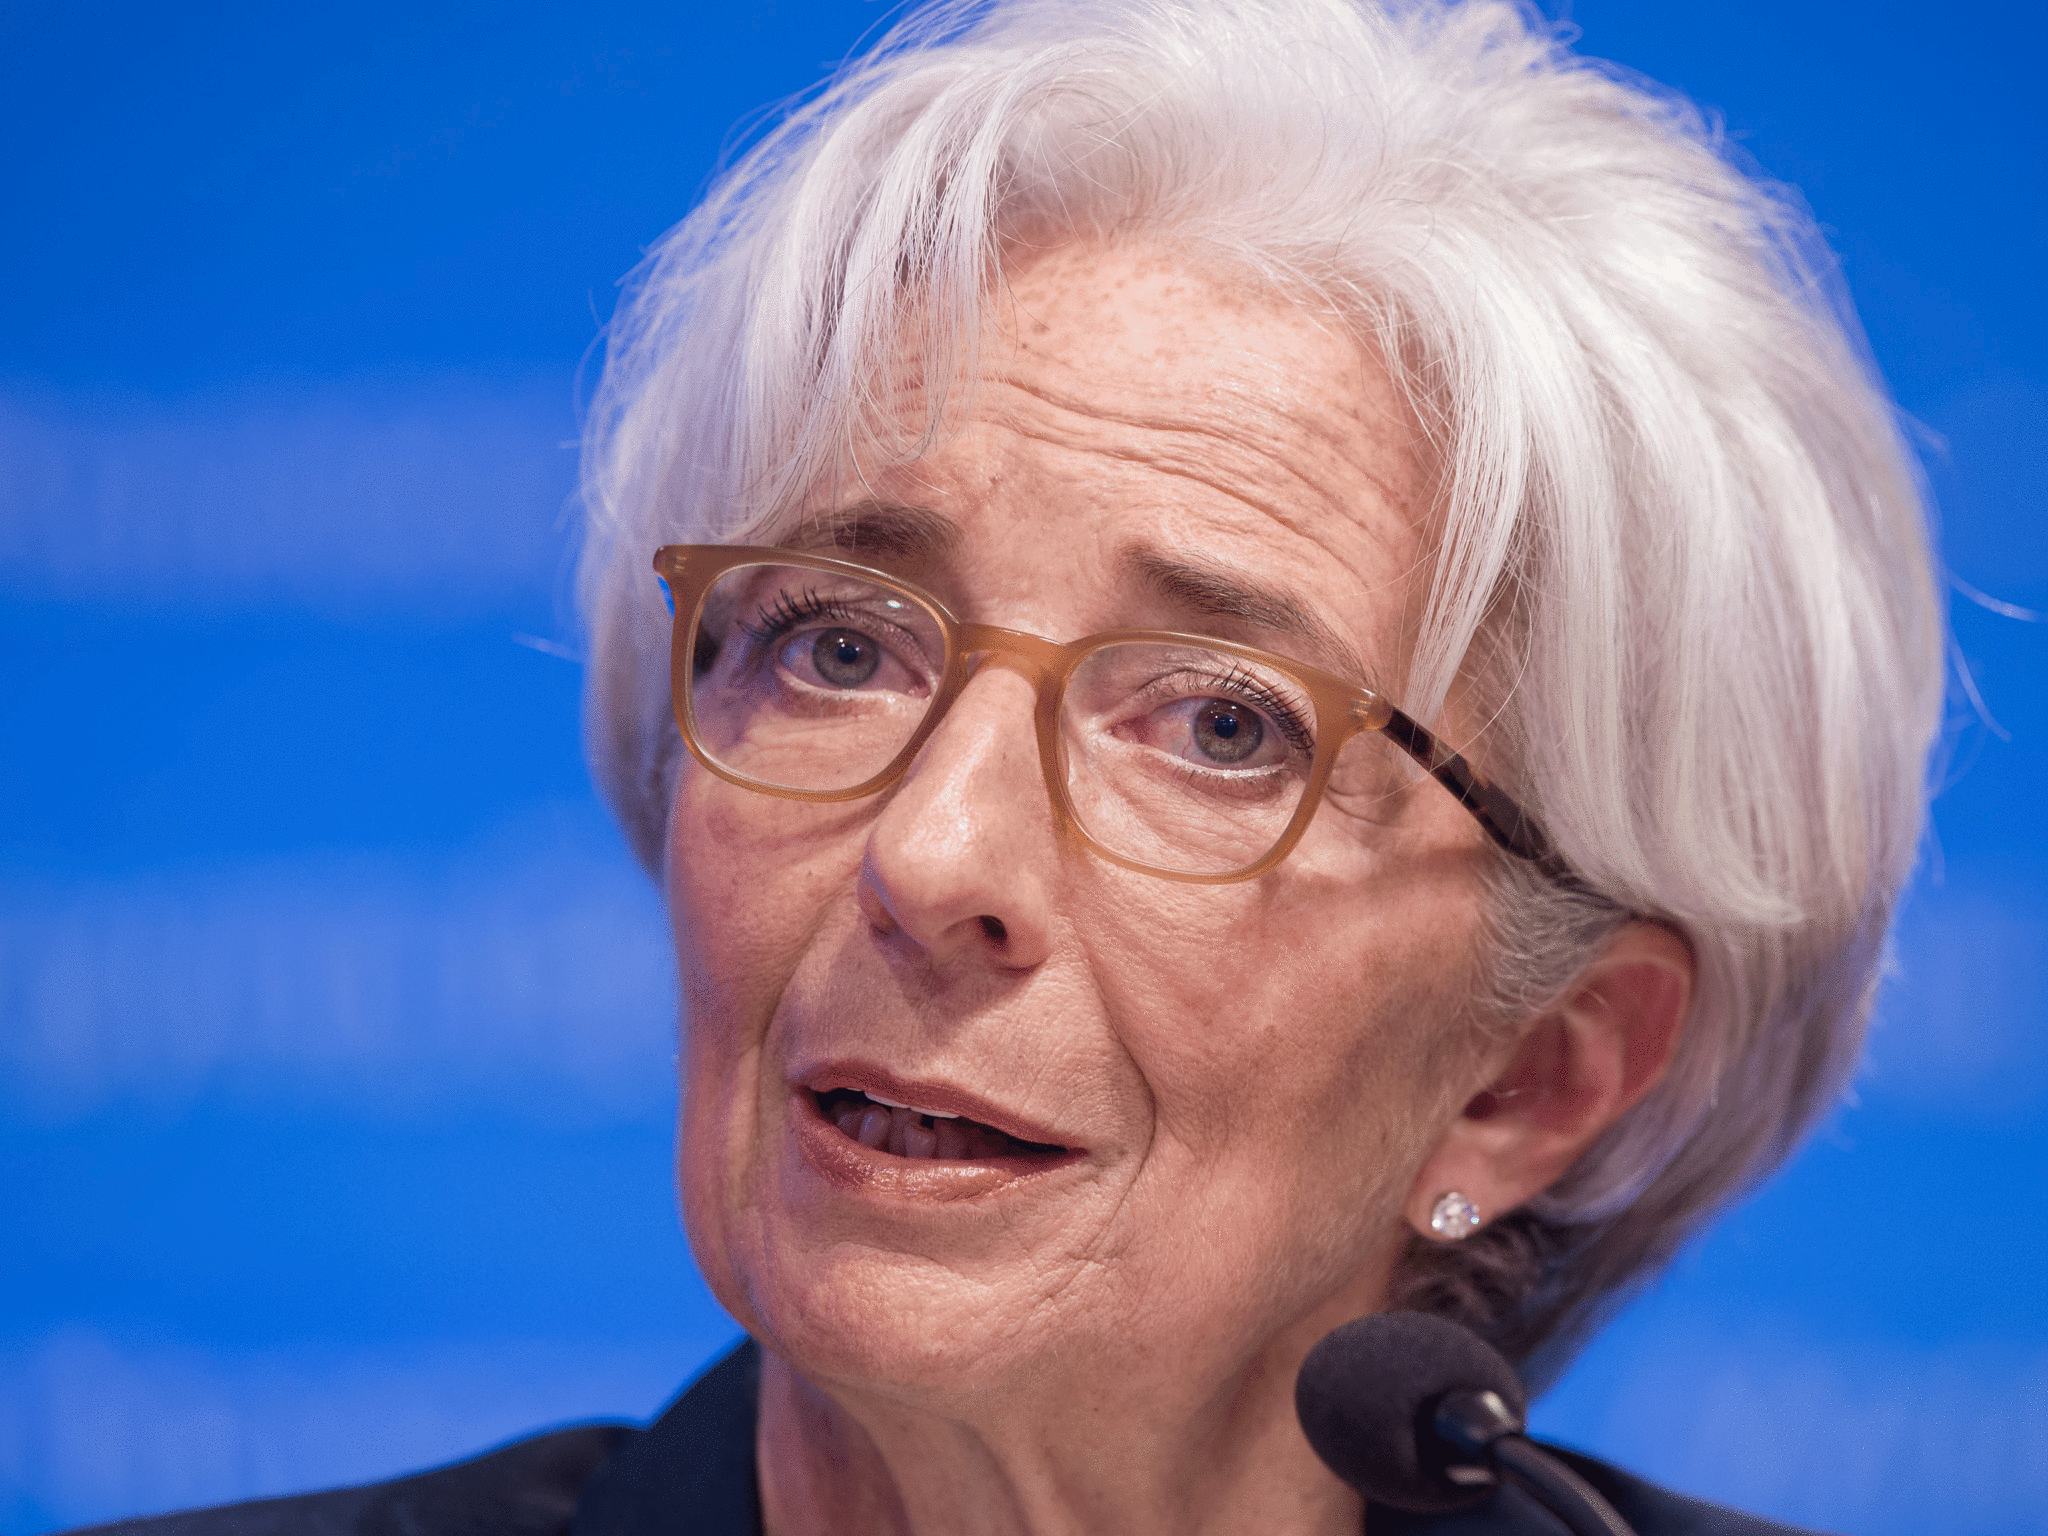 Christine Lagarde, managing director of the IMF, has warned Greece still requires significant debt relief